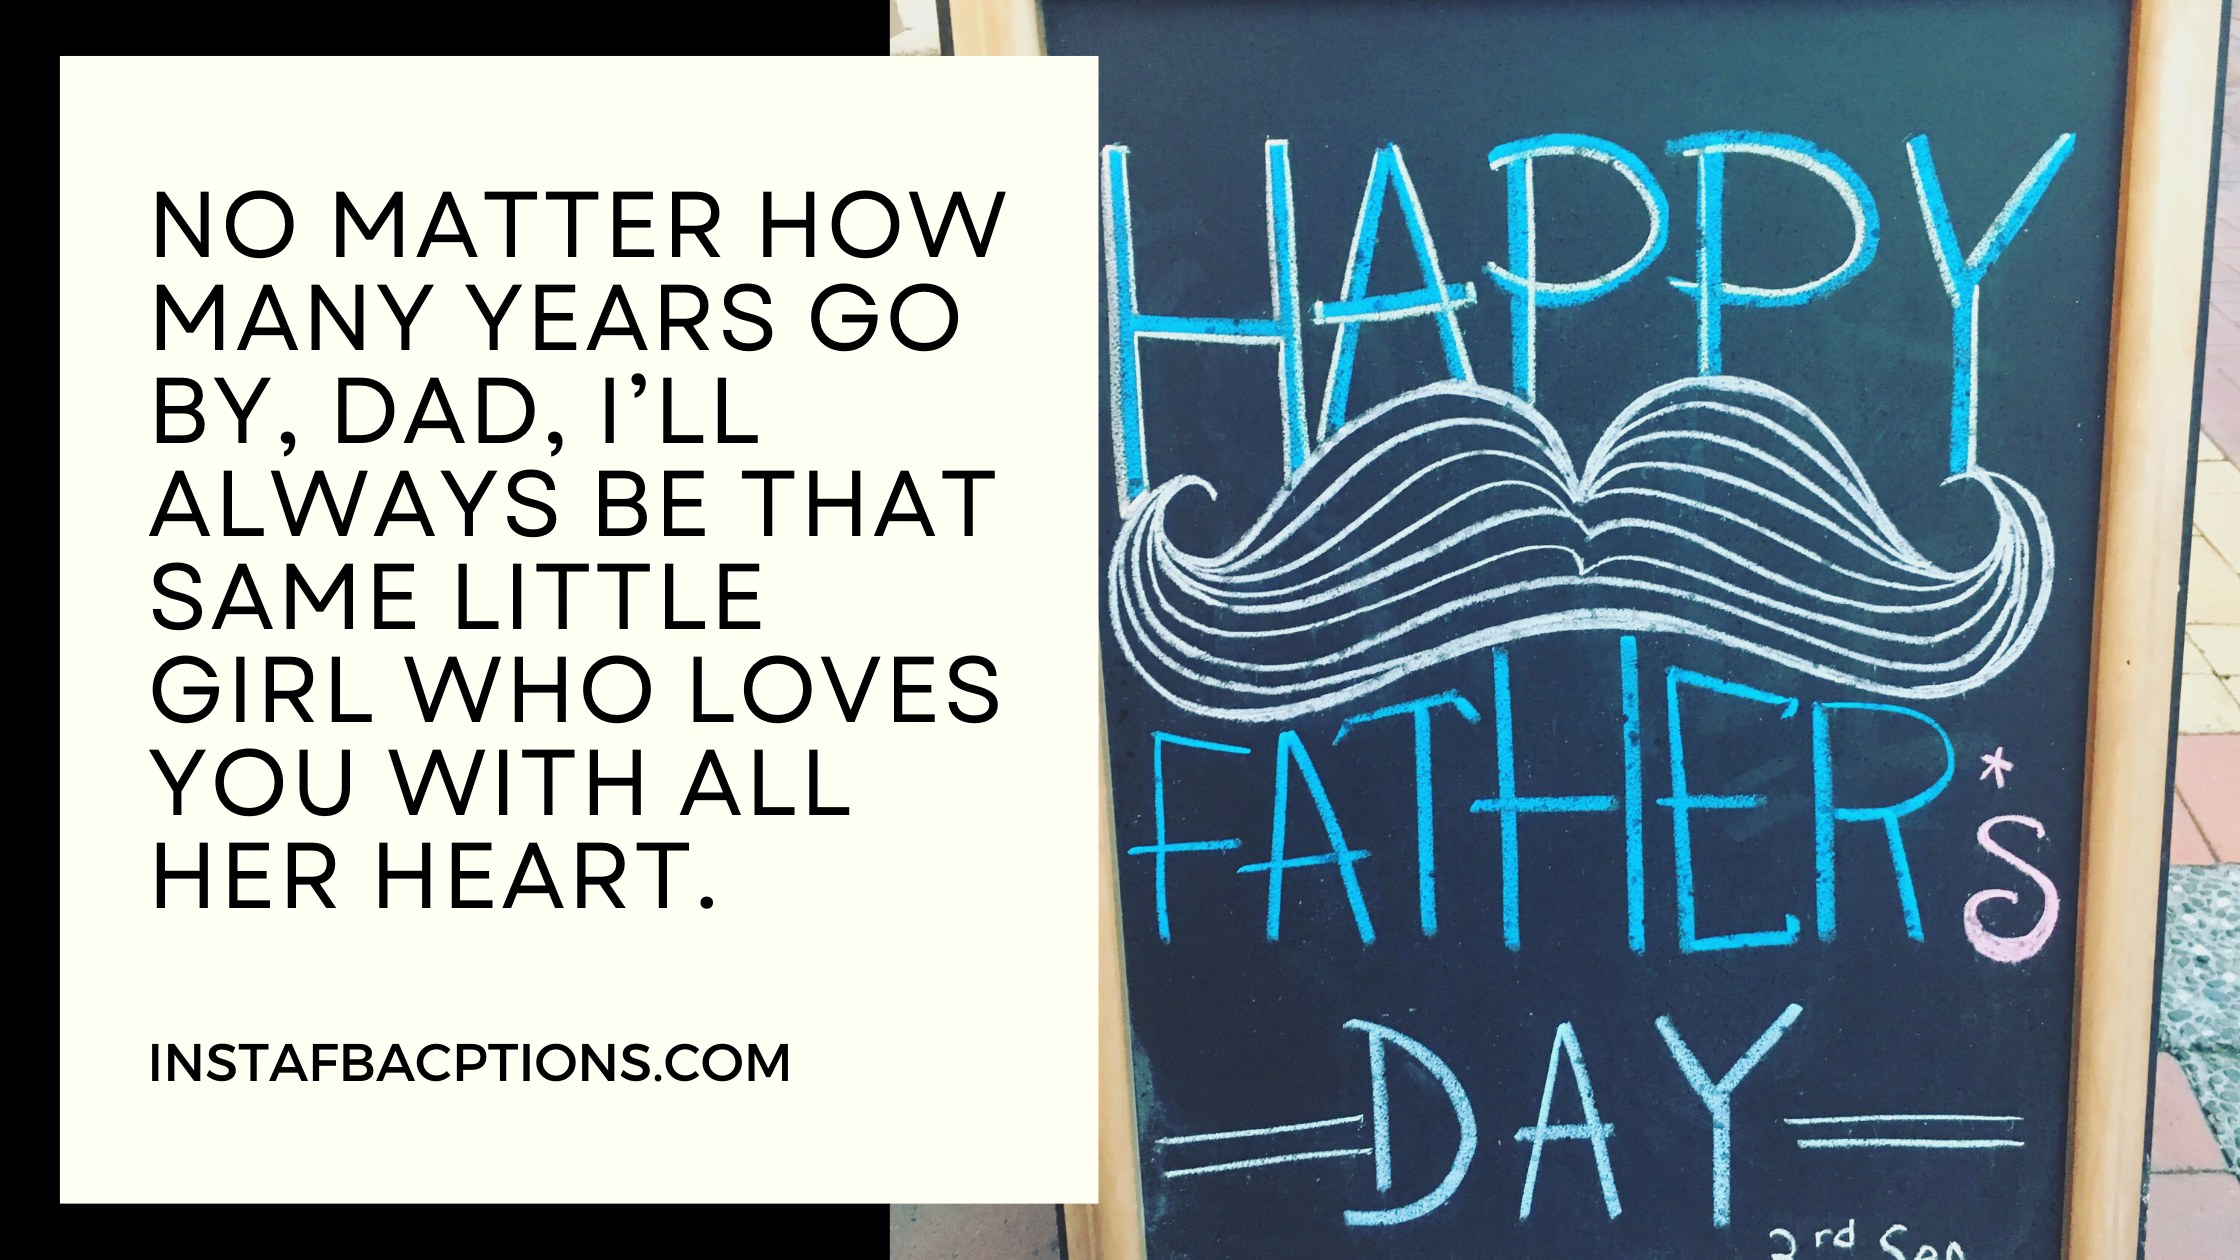 No matter how many years go by, Dad, I’ll always be that same little girl who loves you with all her heart father's day instagram captions - Happy Fathers Day Captions 1 - 110+ Perfect Father&#8217;s Day Captions And Quotes for Instagram &#8211; 2022